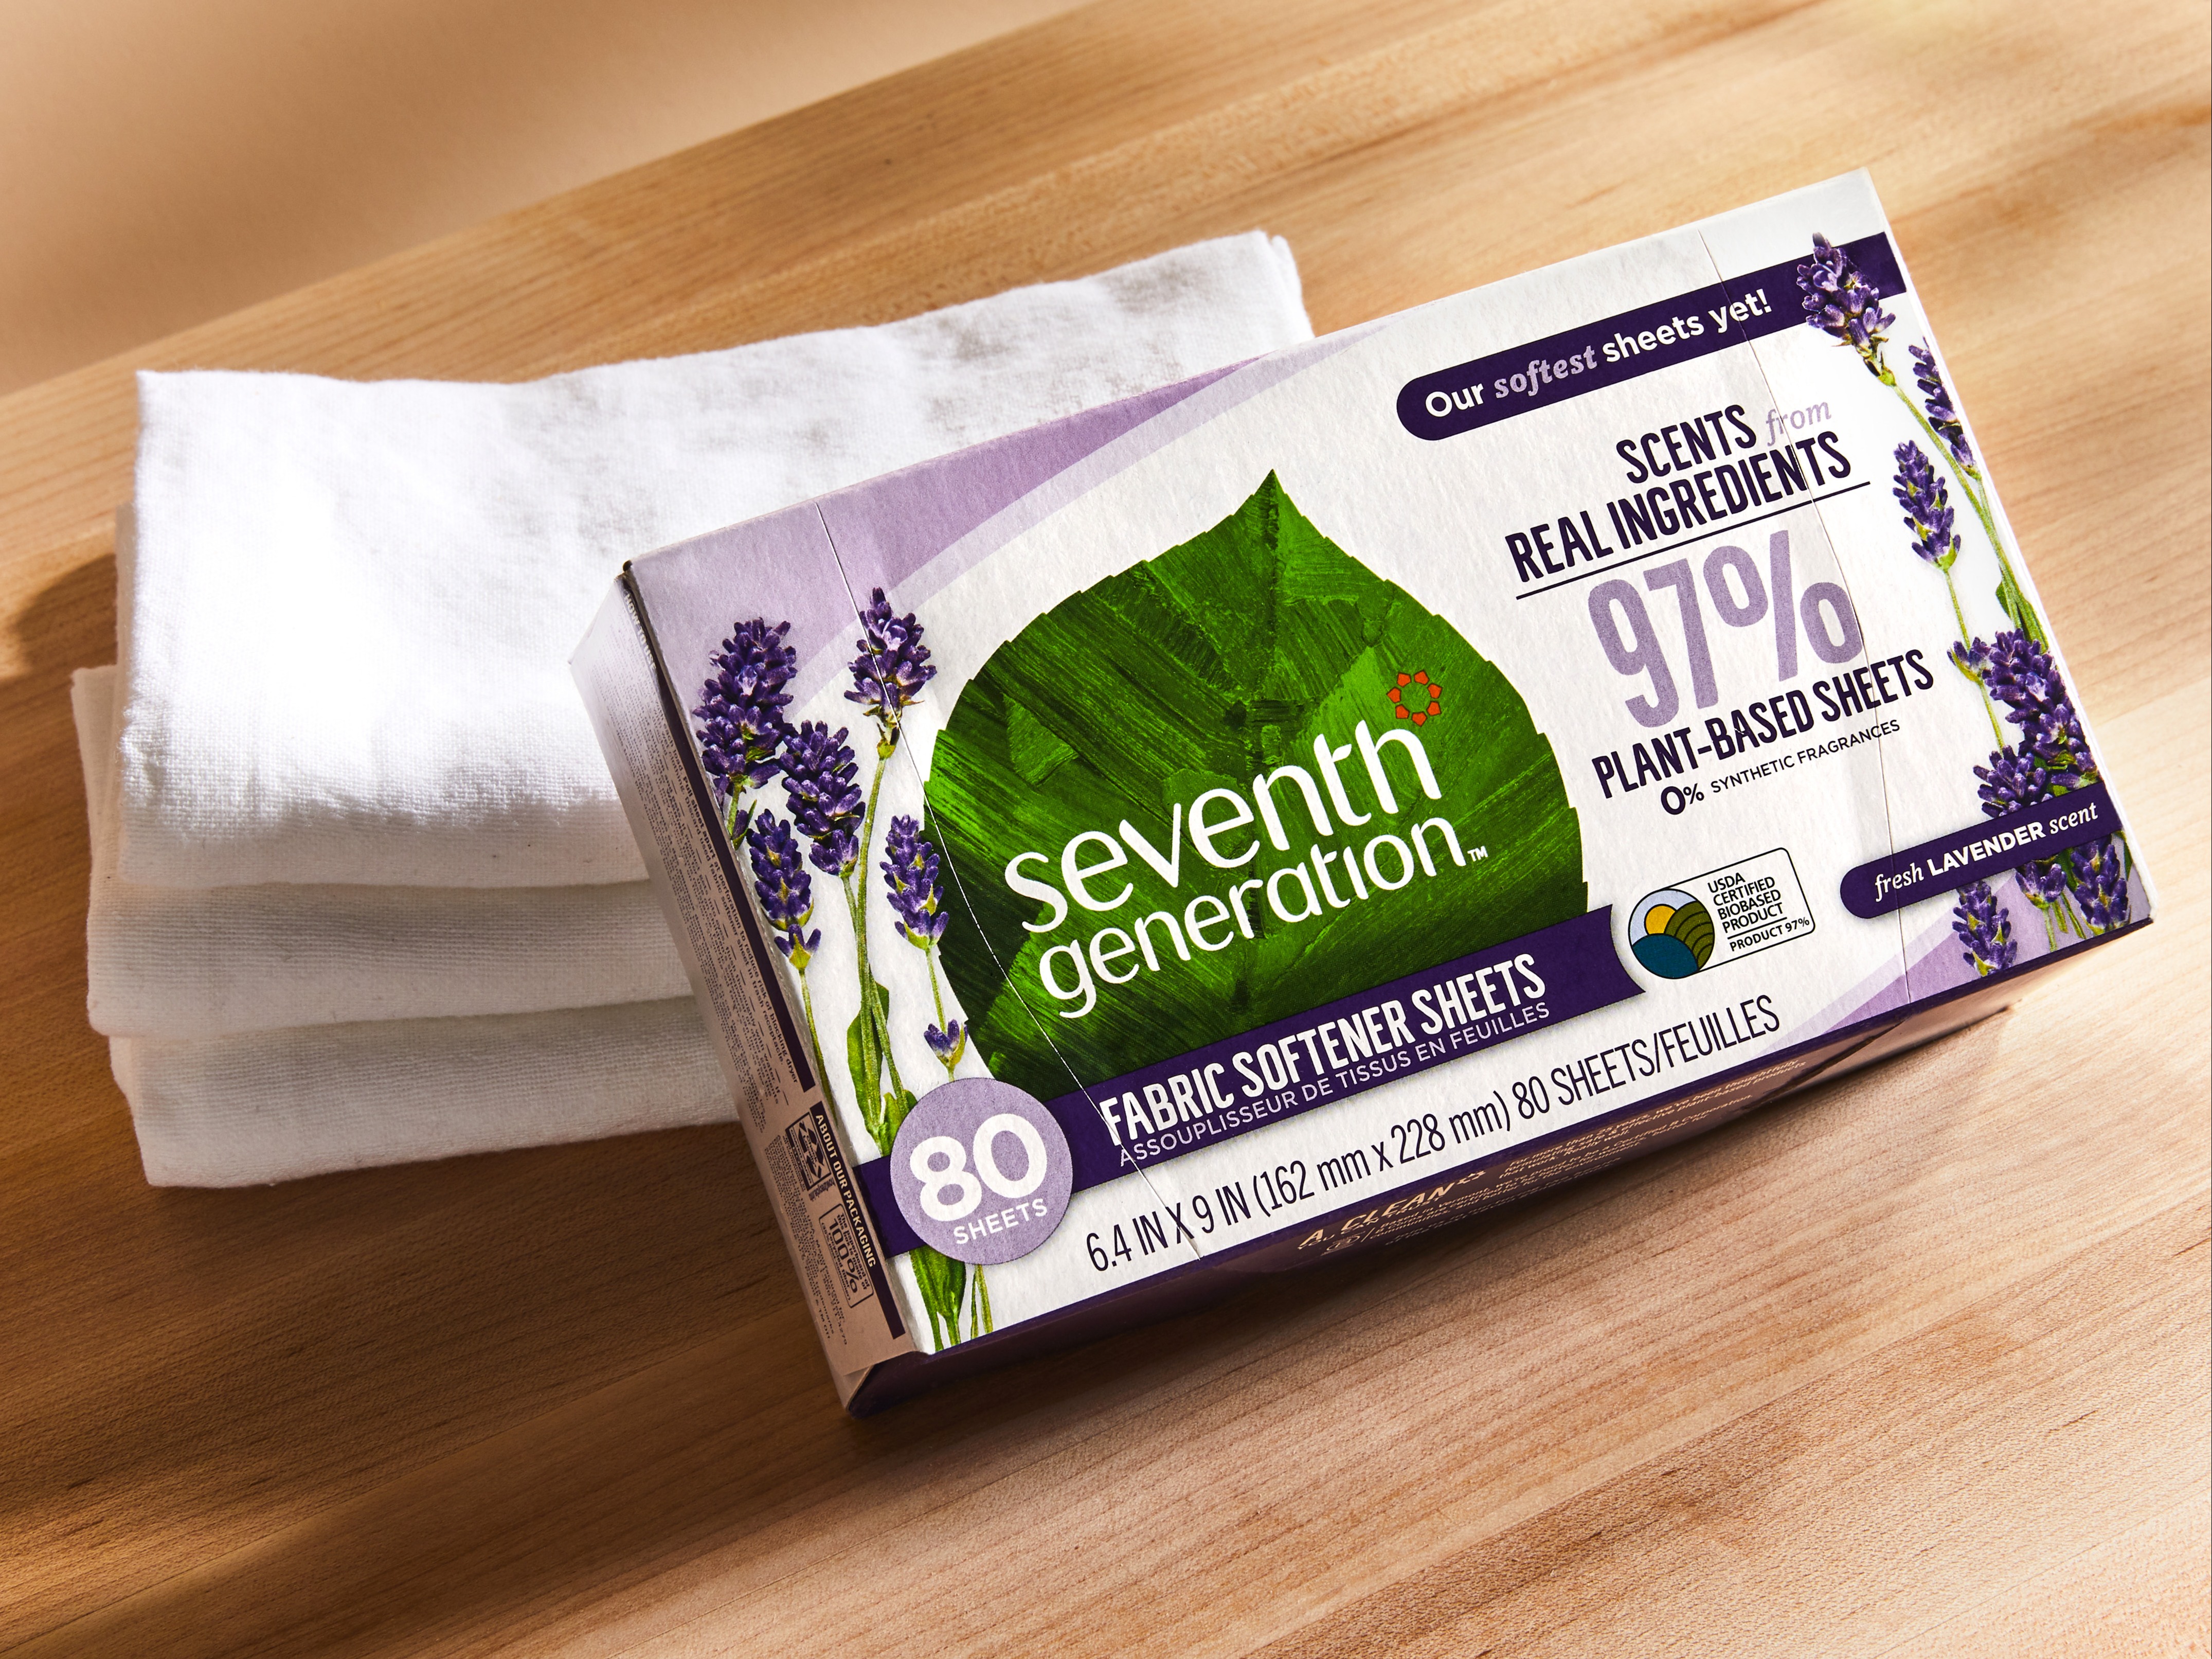 Image of Seventh Generation Lavender dryer sheets in box with box propped up on 3 white cloths